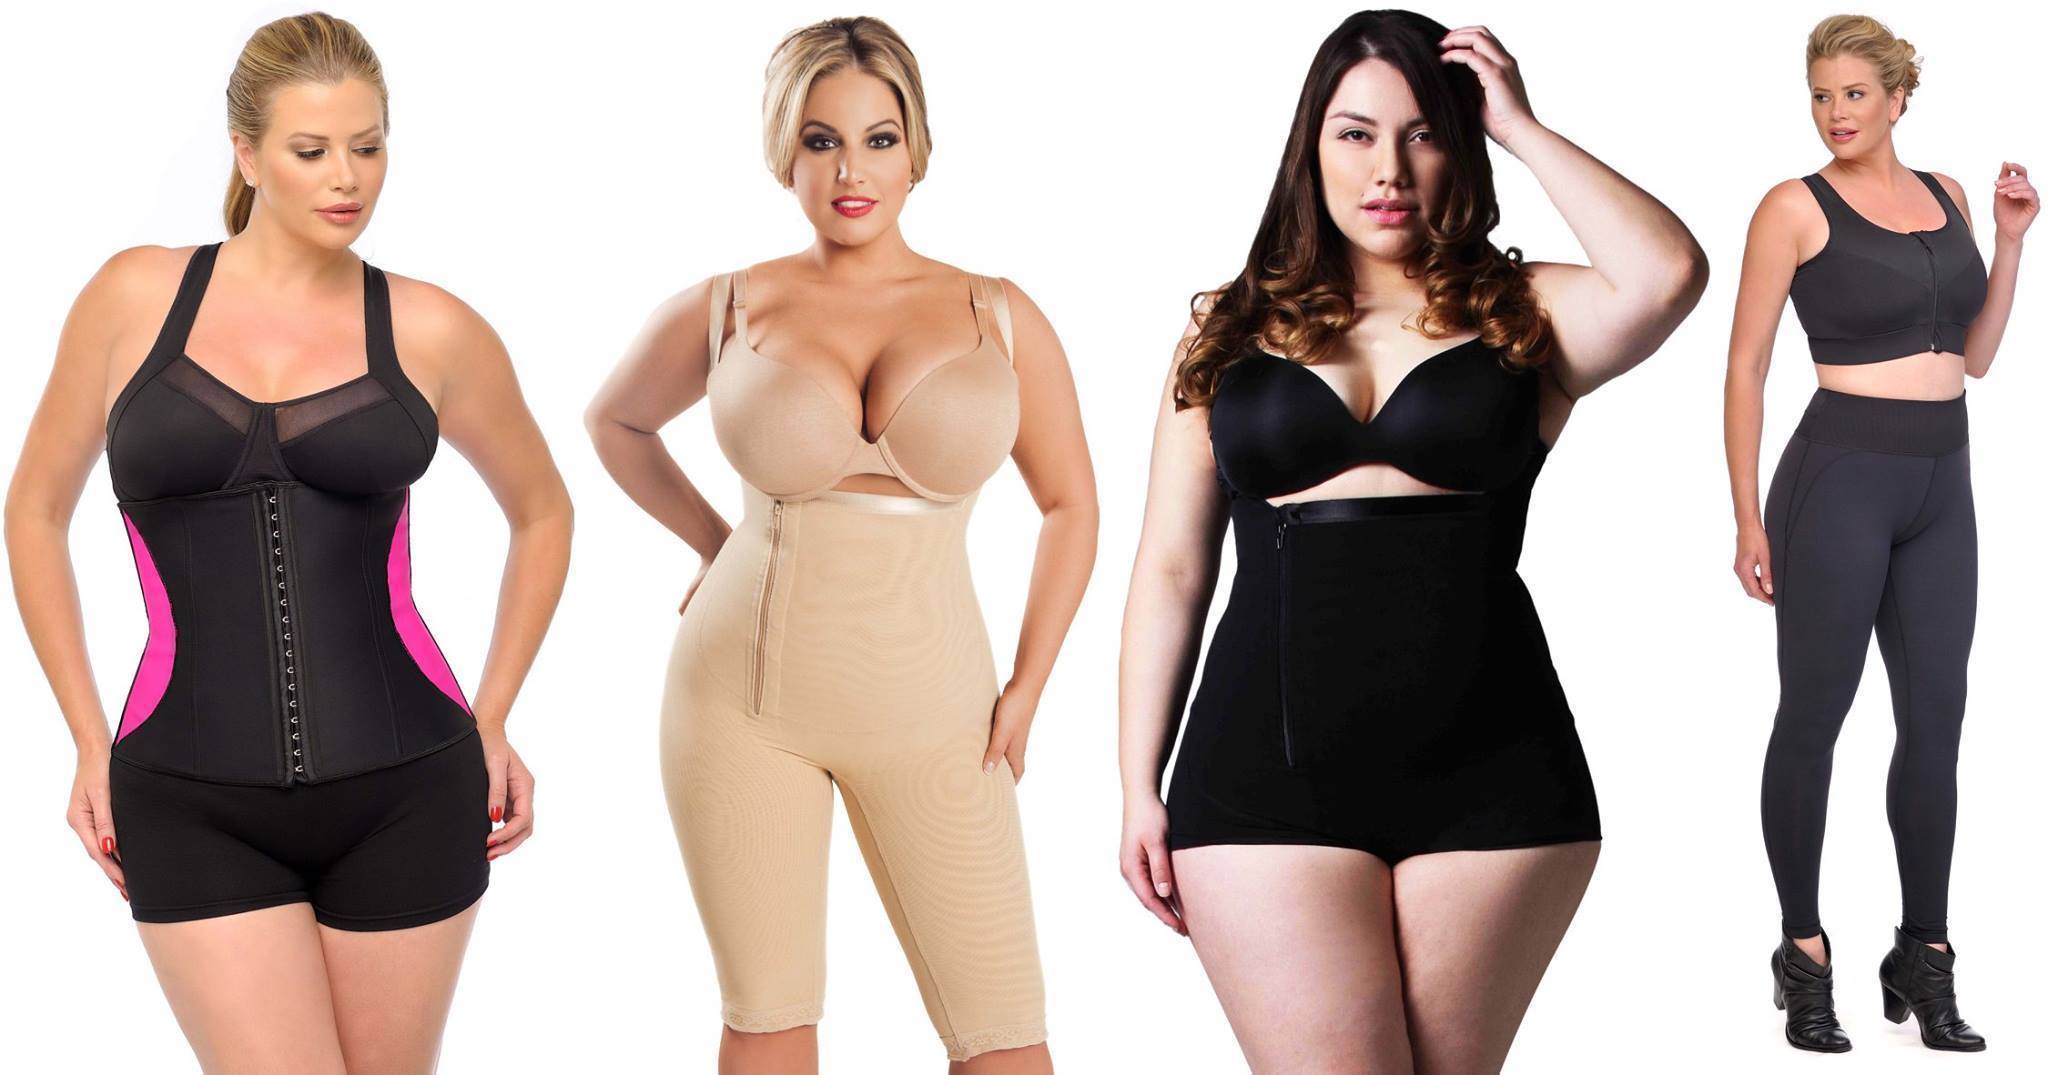 How long do I wear a compression garment after a lipo? - Quora